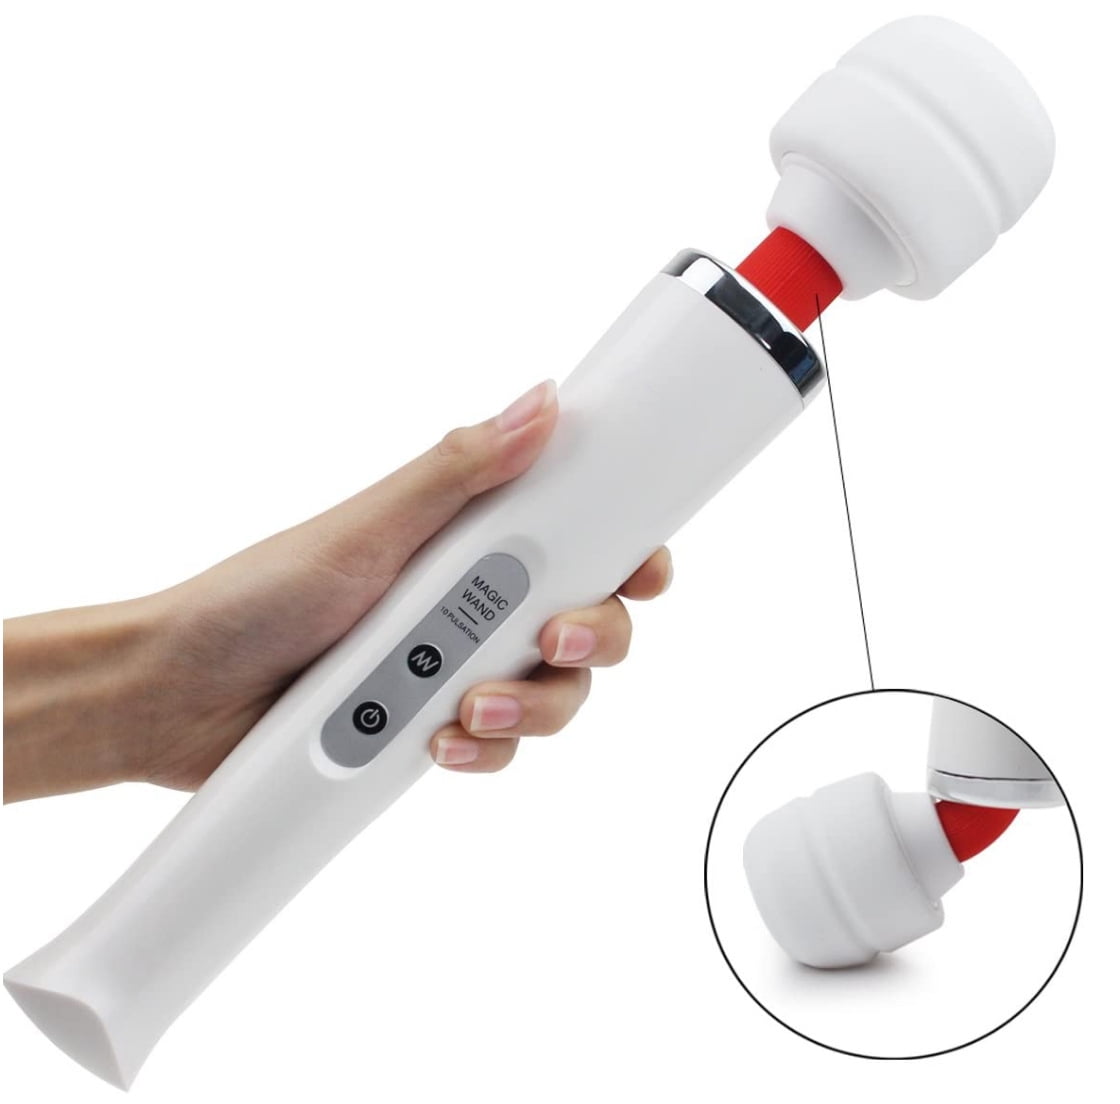 Personal back massager